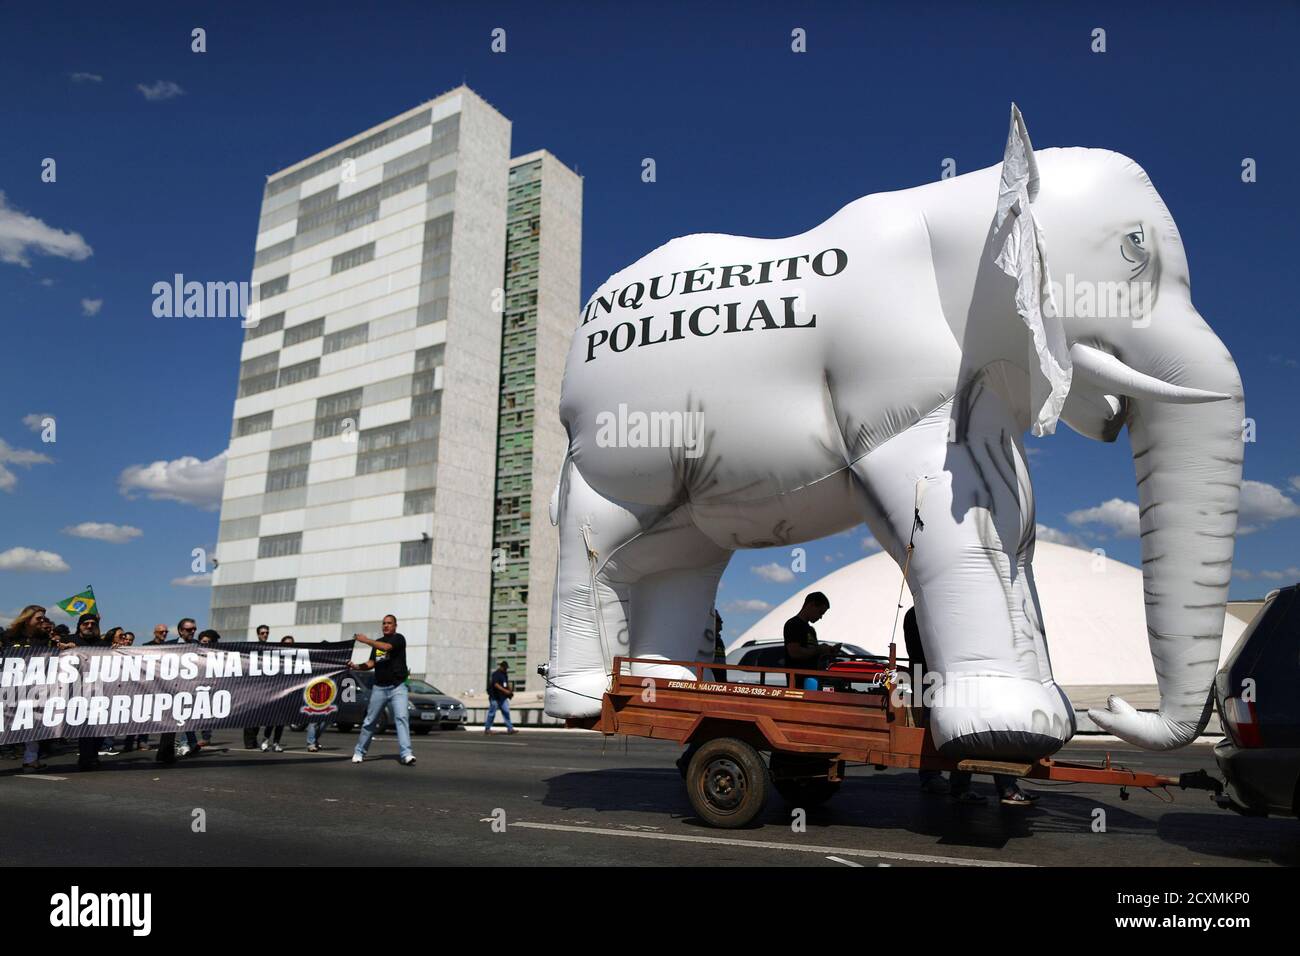 Federal police walk with an inflatable elephant to represent what they say is slowness in police investigation procedures during the 'March for Reform of the Federal Police' in front of the National Congress in Brasilia July 16, 2013. The protesters demanded changes in the structure and modernization of criminal investigations. REUTERS/Ueslei Marcelino (BRAZIL - Tags: BUSINESS EMPLOYMENT CRIME LAW CIVIL UNREST) Stock Photo